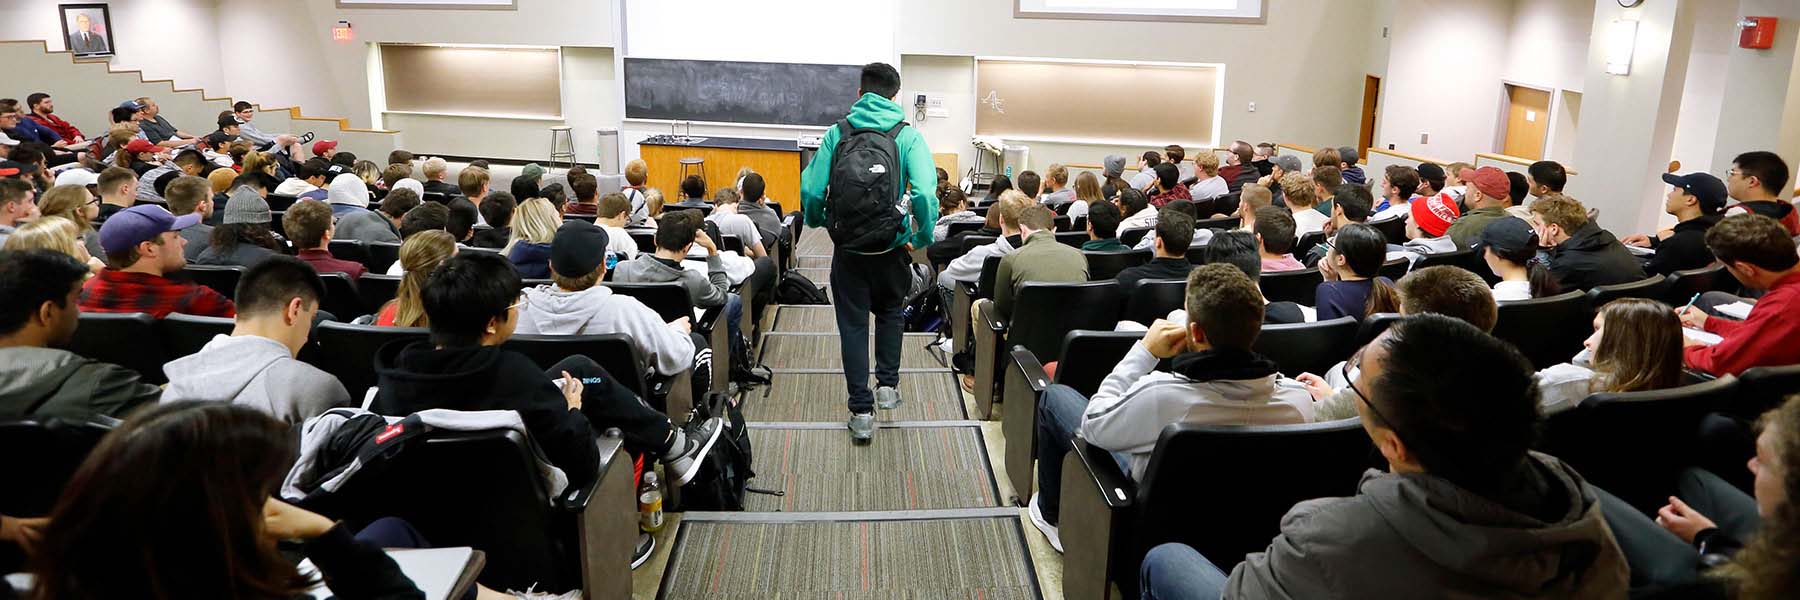 A student walks down the stairs to join his class in a large lecture hall.